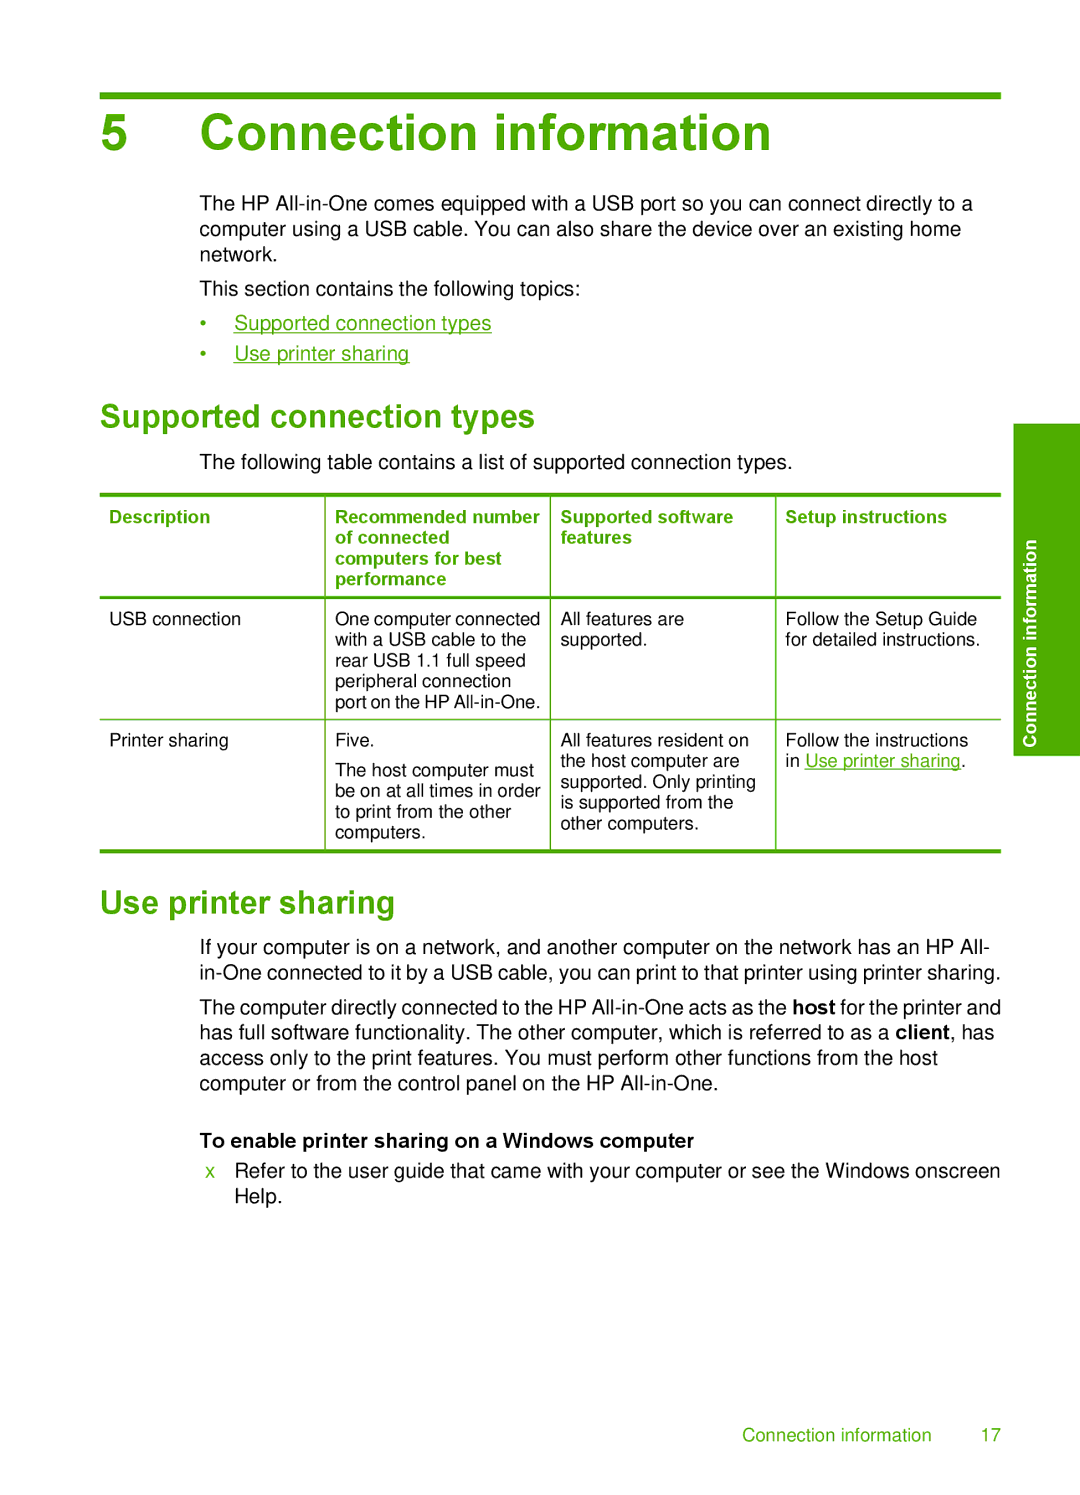 HP F4180, F4140, F4185, F4172, F4190 manual Connection information, Supported connection types, Use printer sharing 